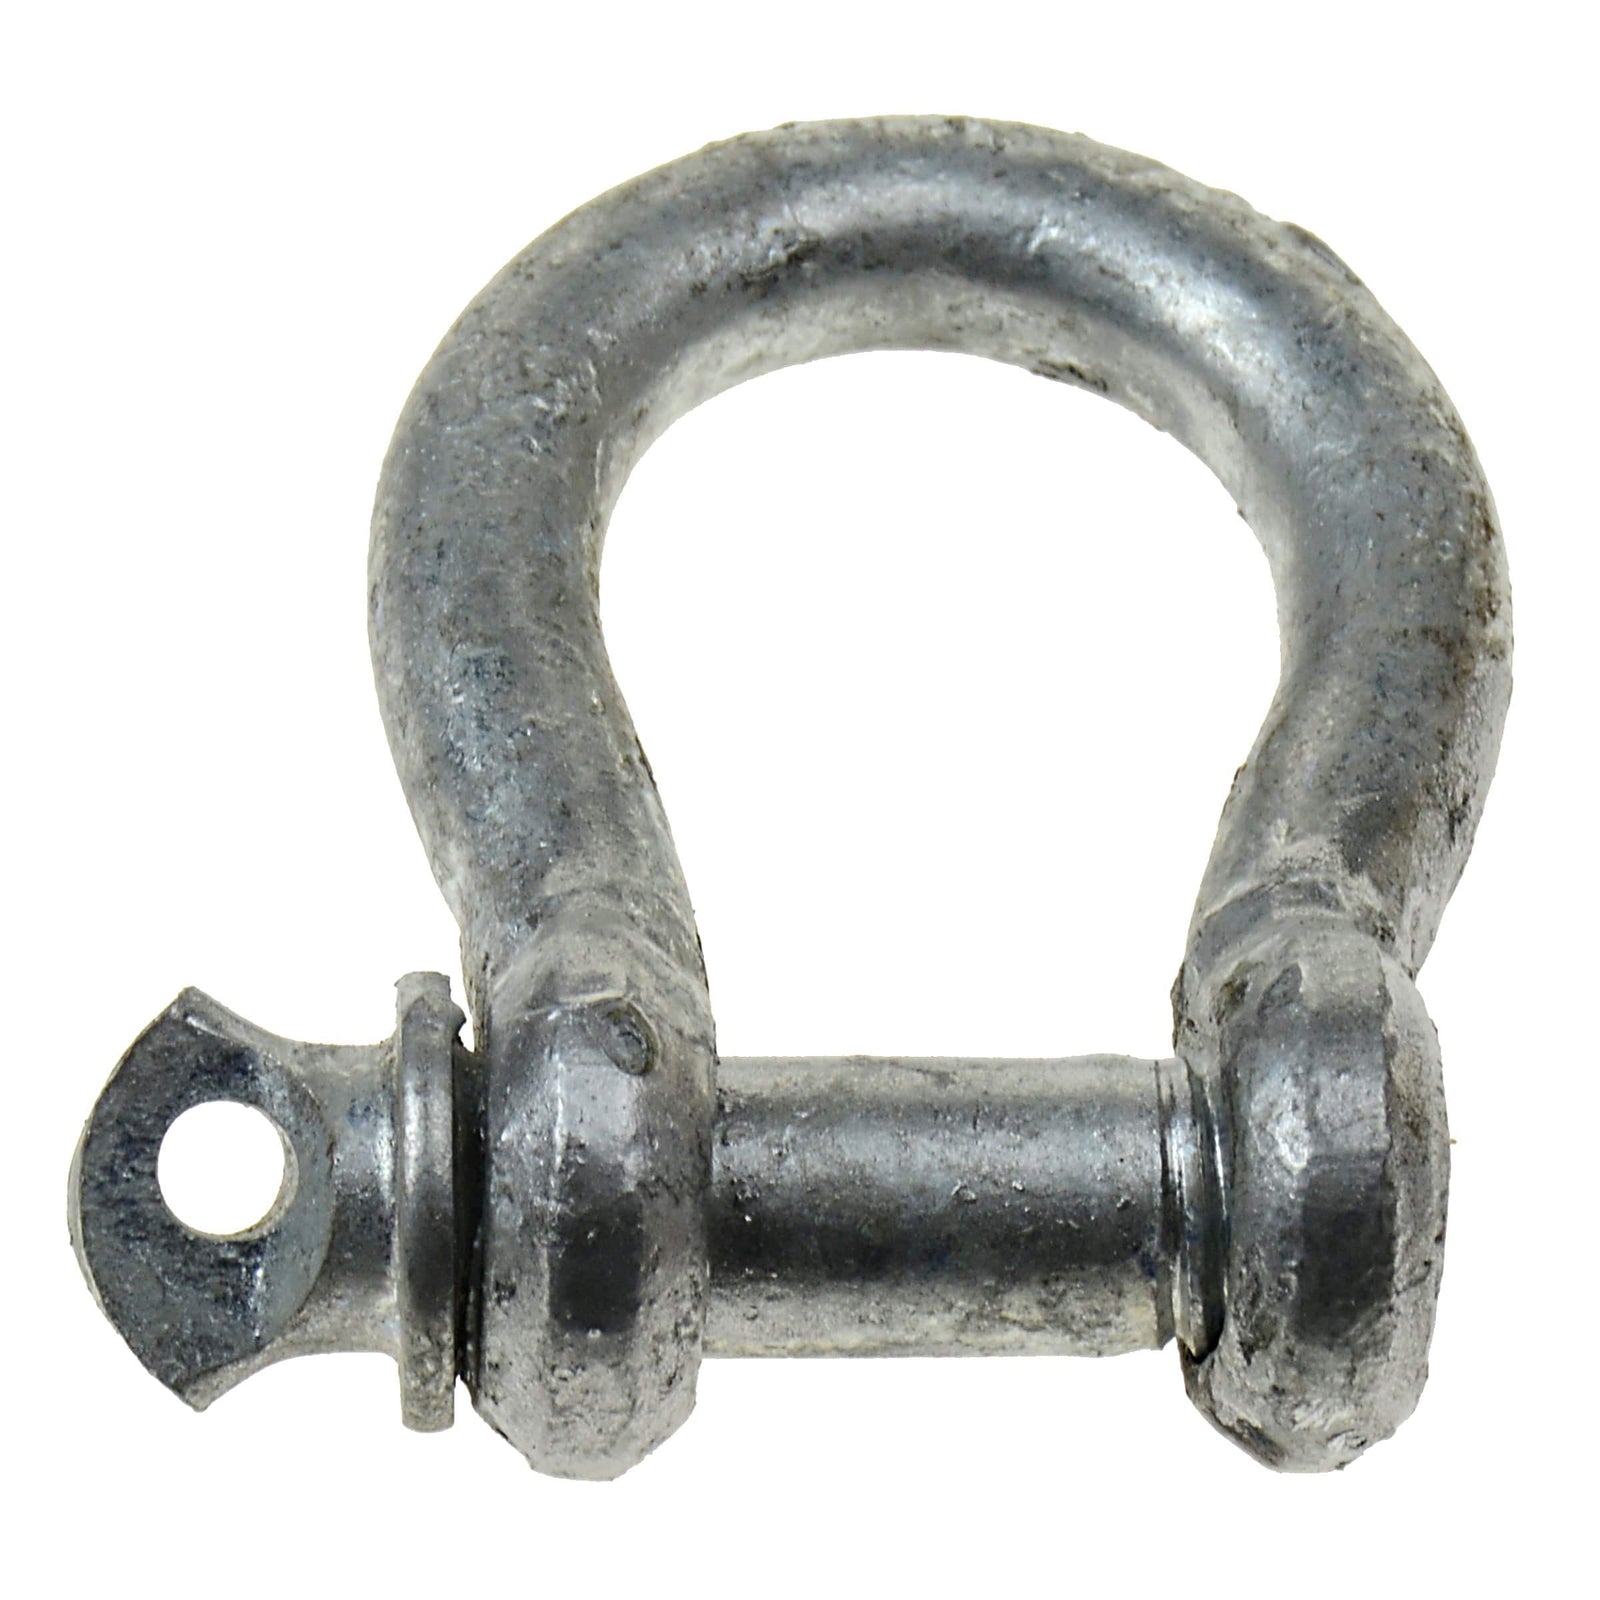 Galvanized Anchor Shackle For Boat, 5/16"